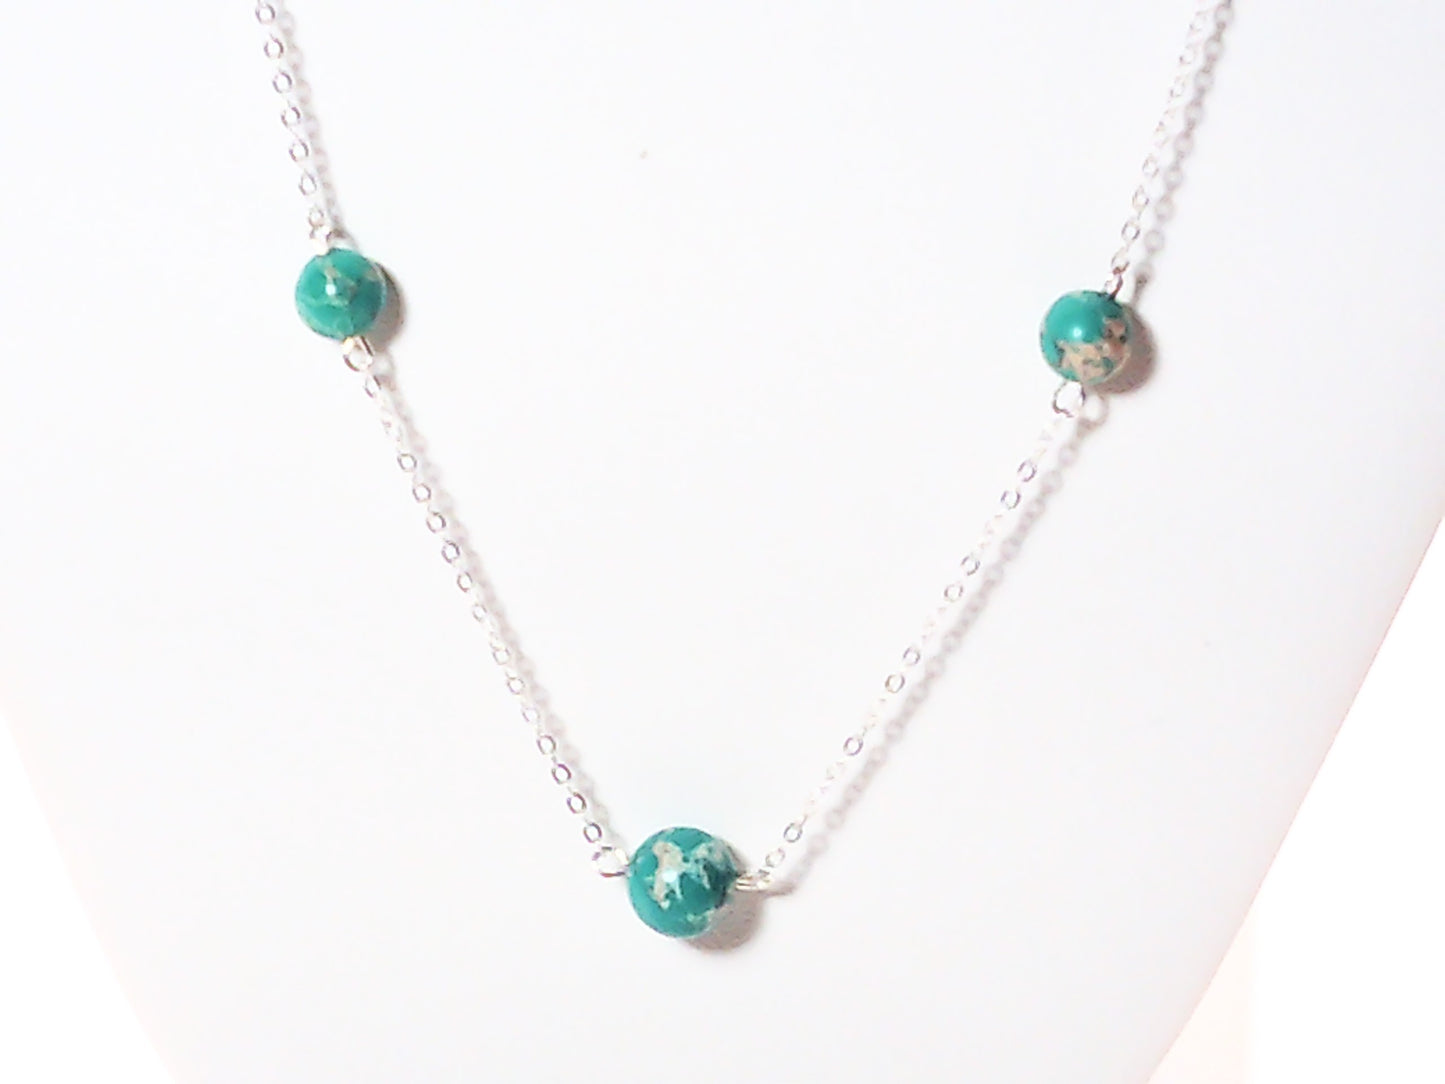 Genuine turquoise and Kambra jasper stone necklace made with sterling silver chain 36 inches. - Providence silver gold jewelry usa